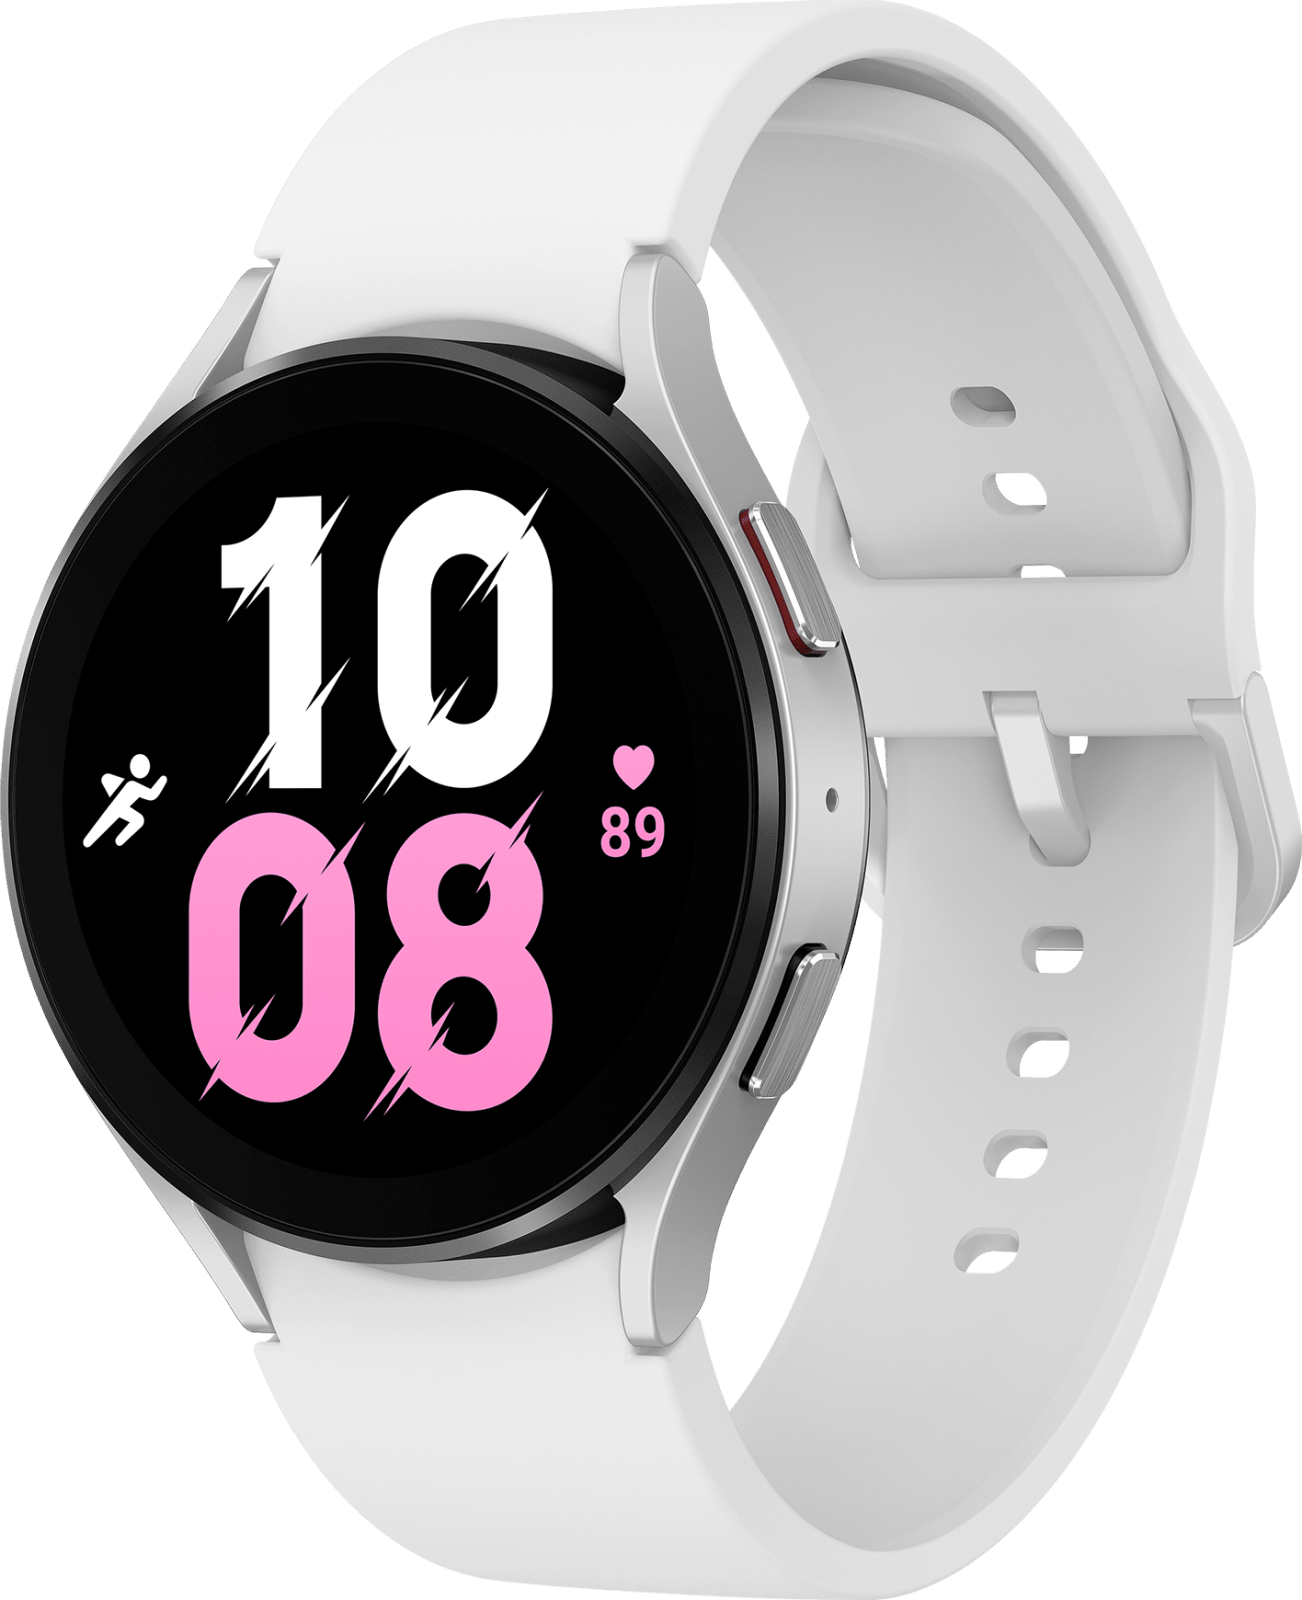 Milliard repulsion Crack pot Rent Samsung Galaxy Watch 5 Smartwatch, Aluminium Case and Sport Band, 44mm  from $19.90 per month